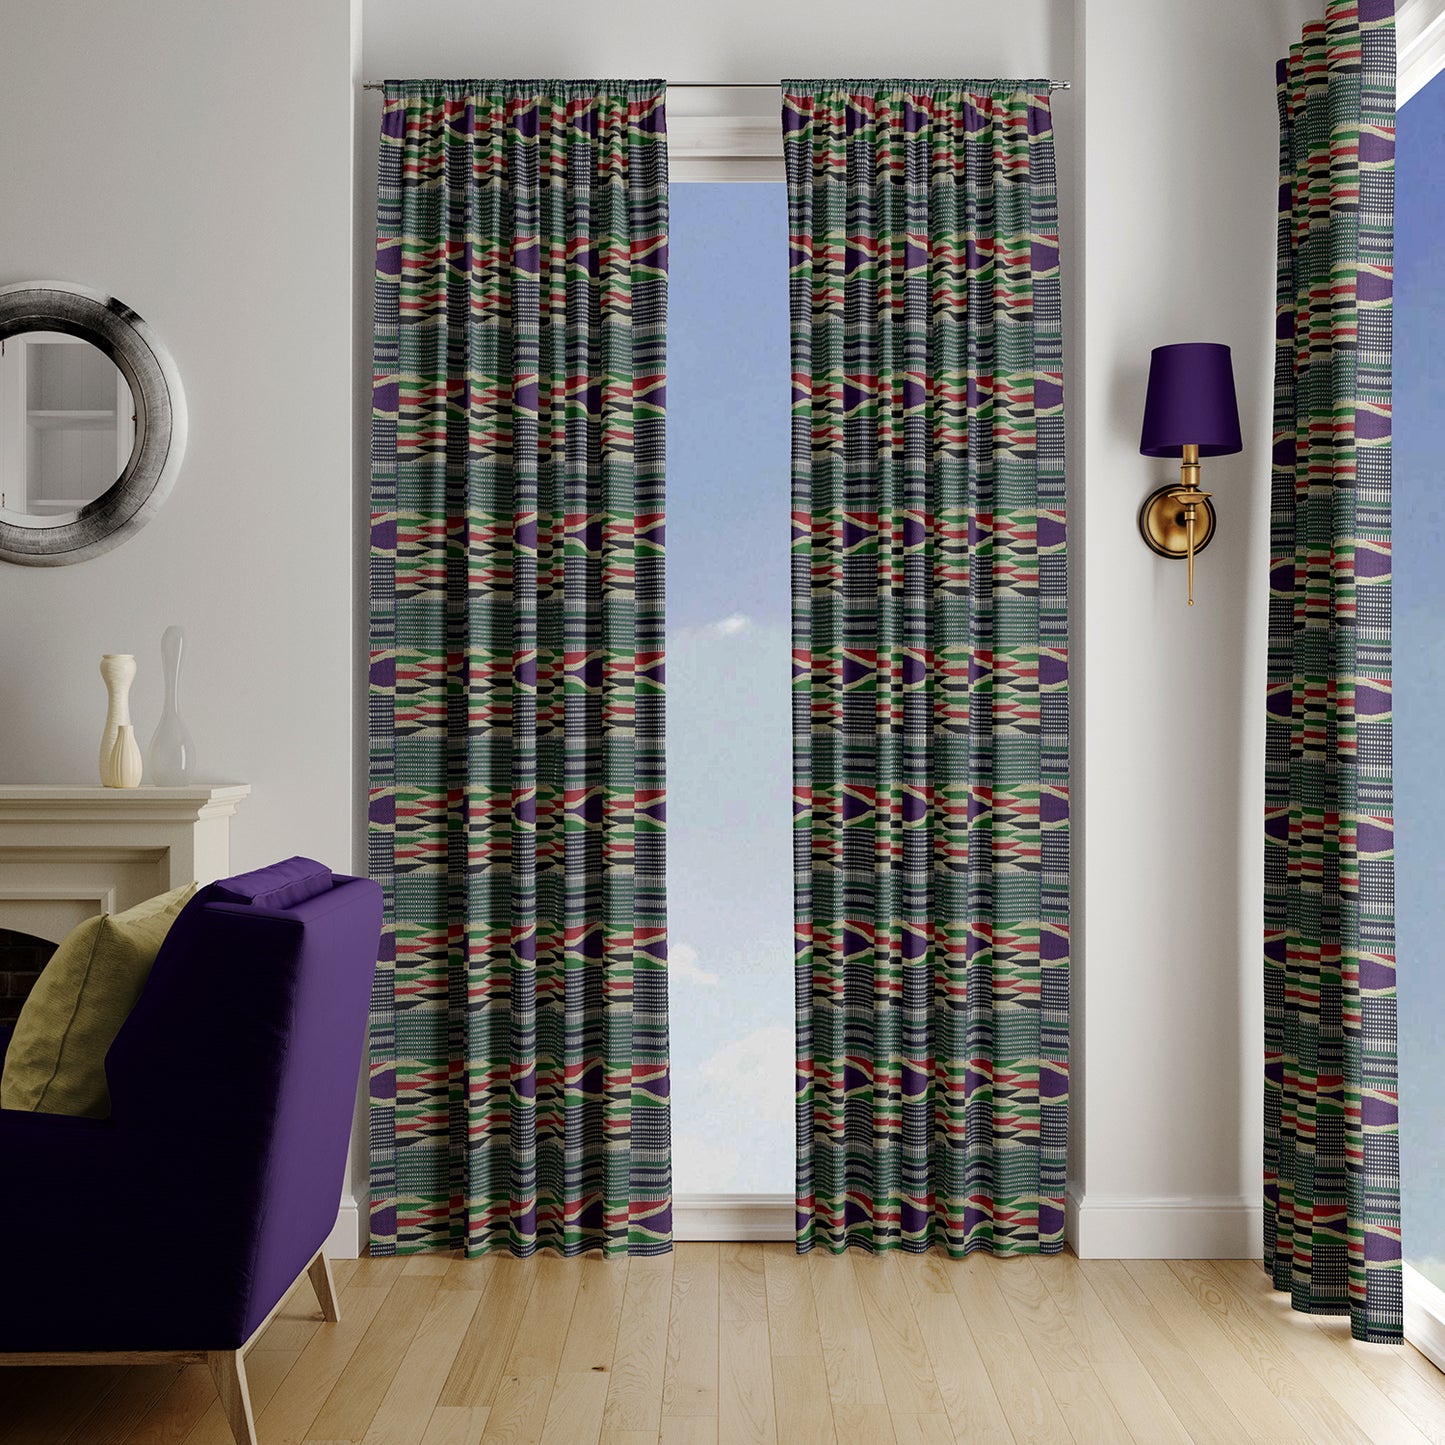 Boho Curtains in African Kente Cloth Inspired - Traditional